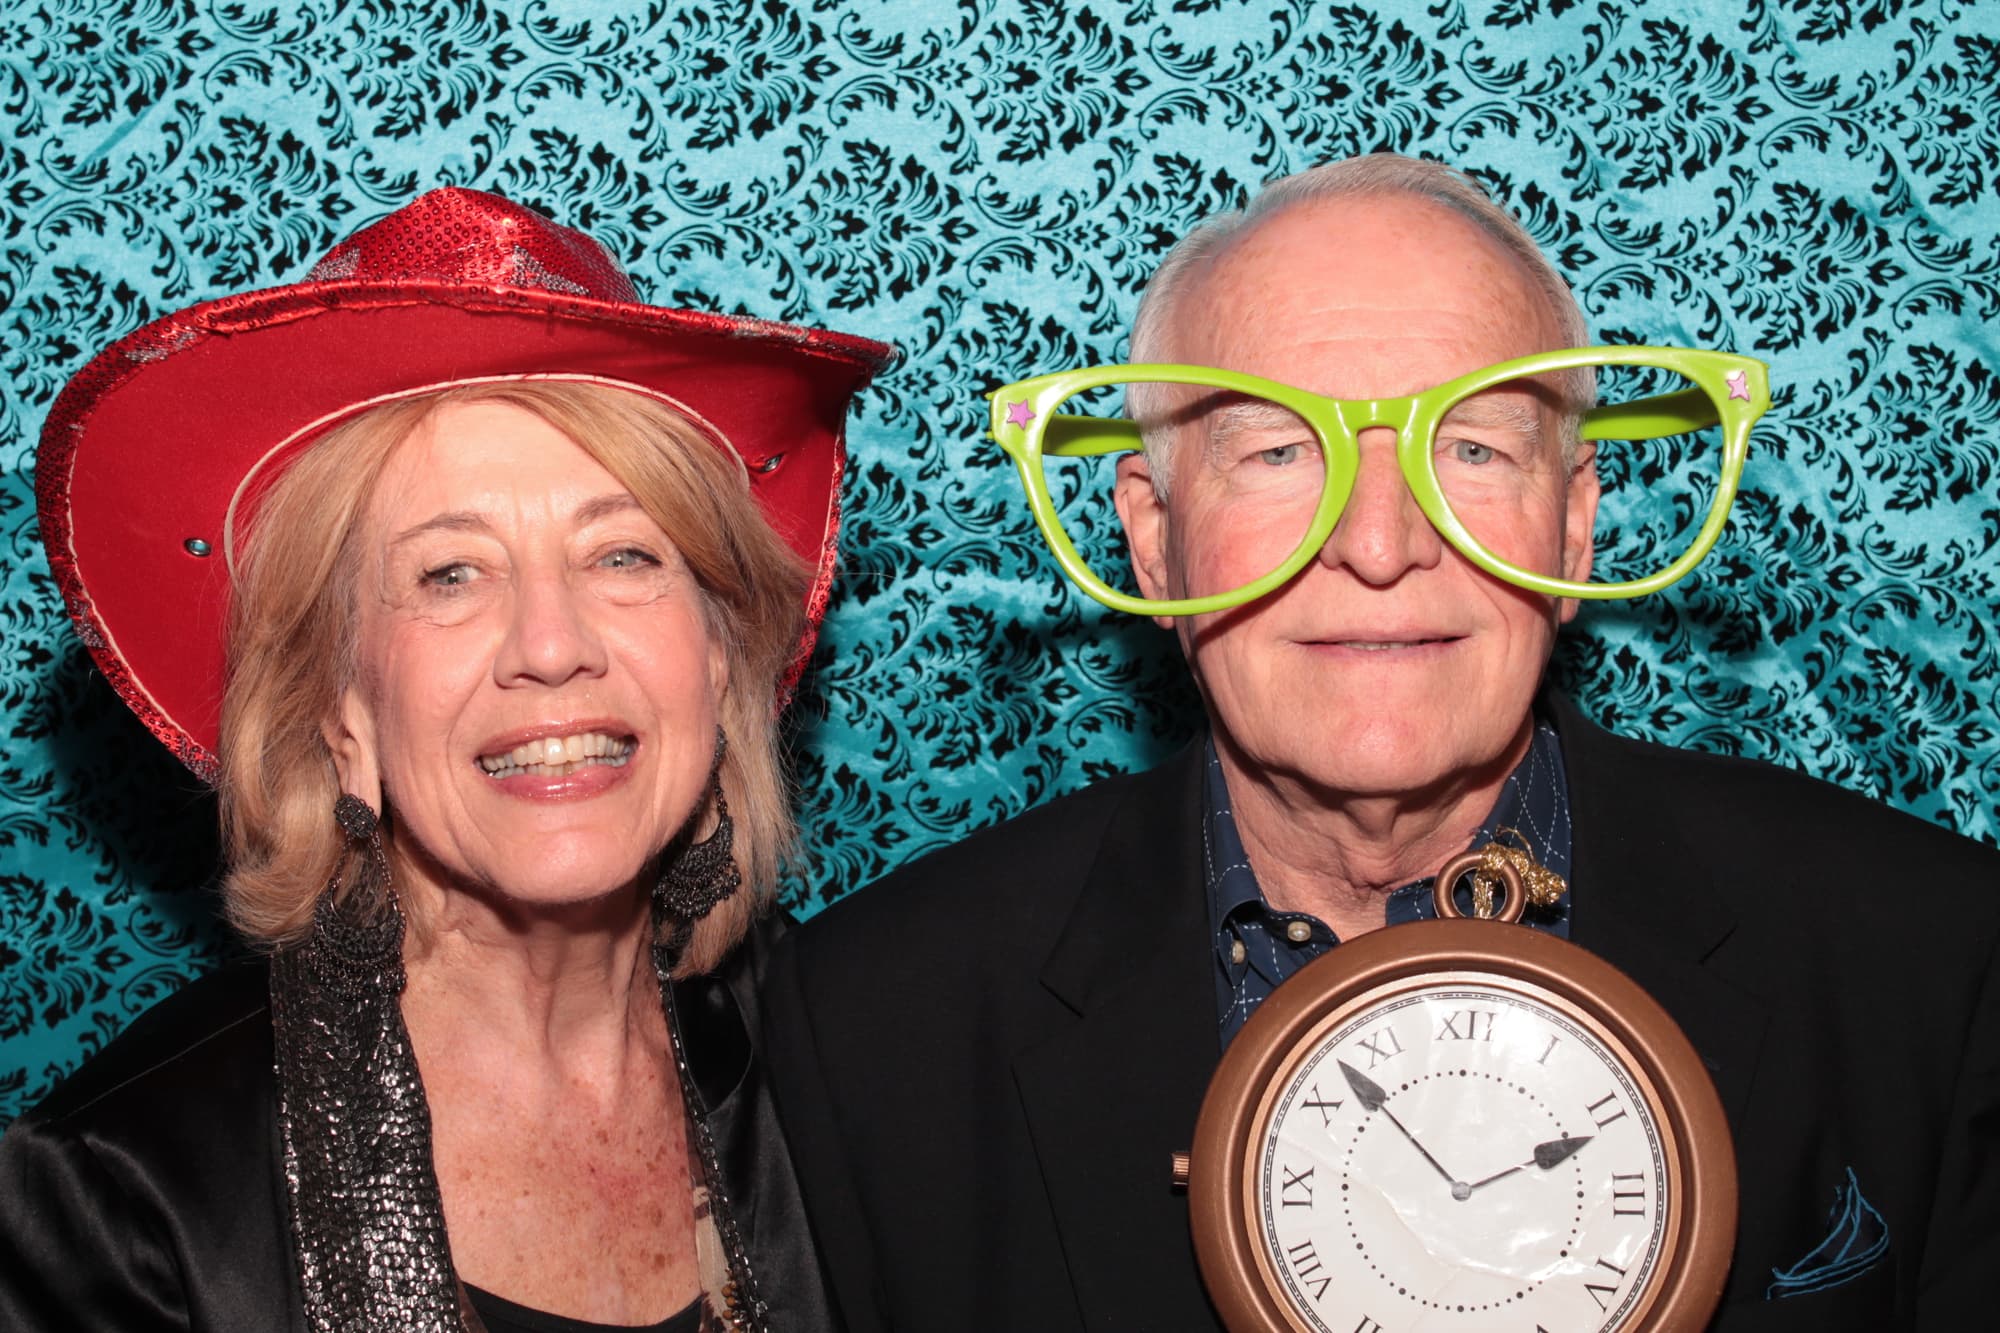 Photobooth-Rental-Company-Party-Anniversity-No. 1-Austin-Memories-Awesome-Fun